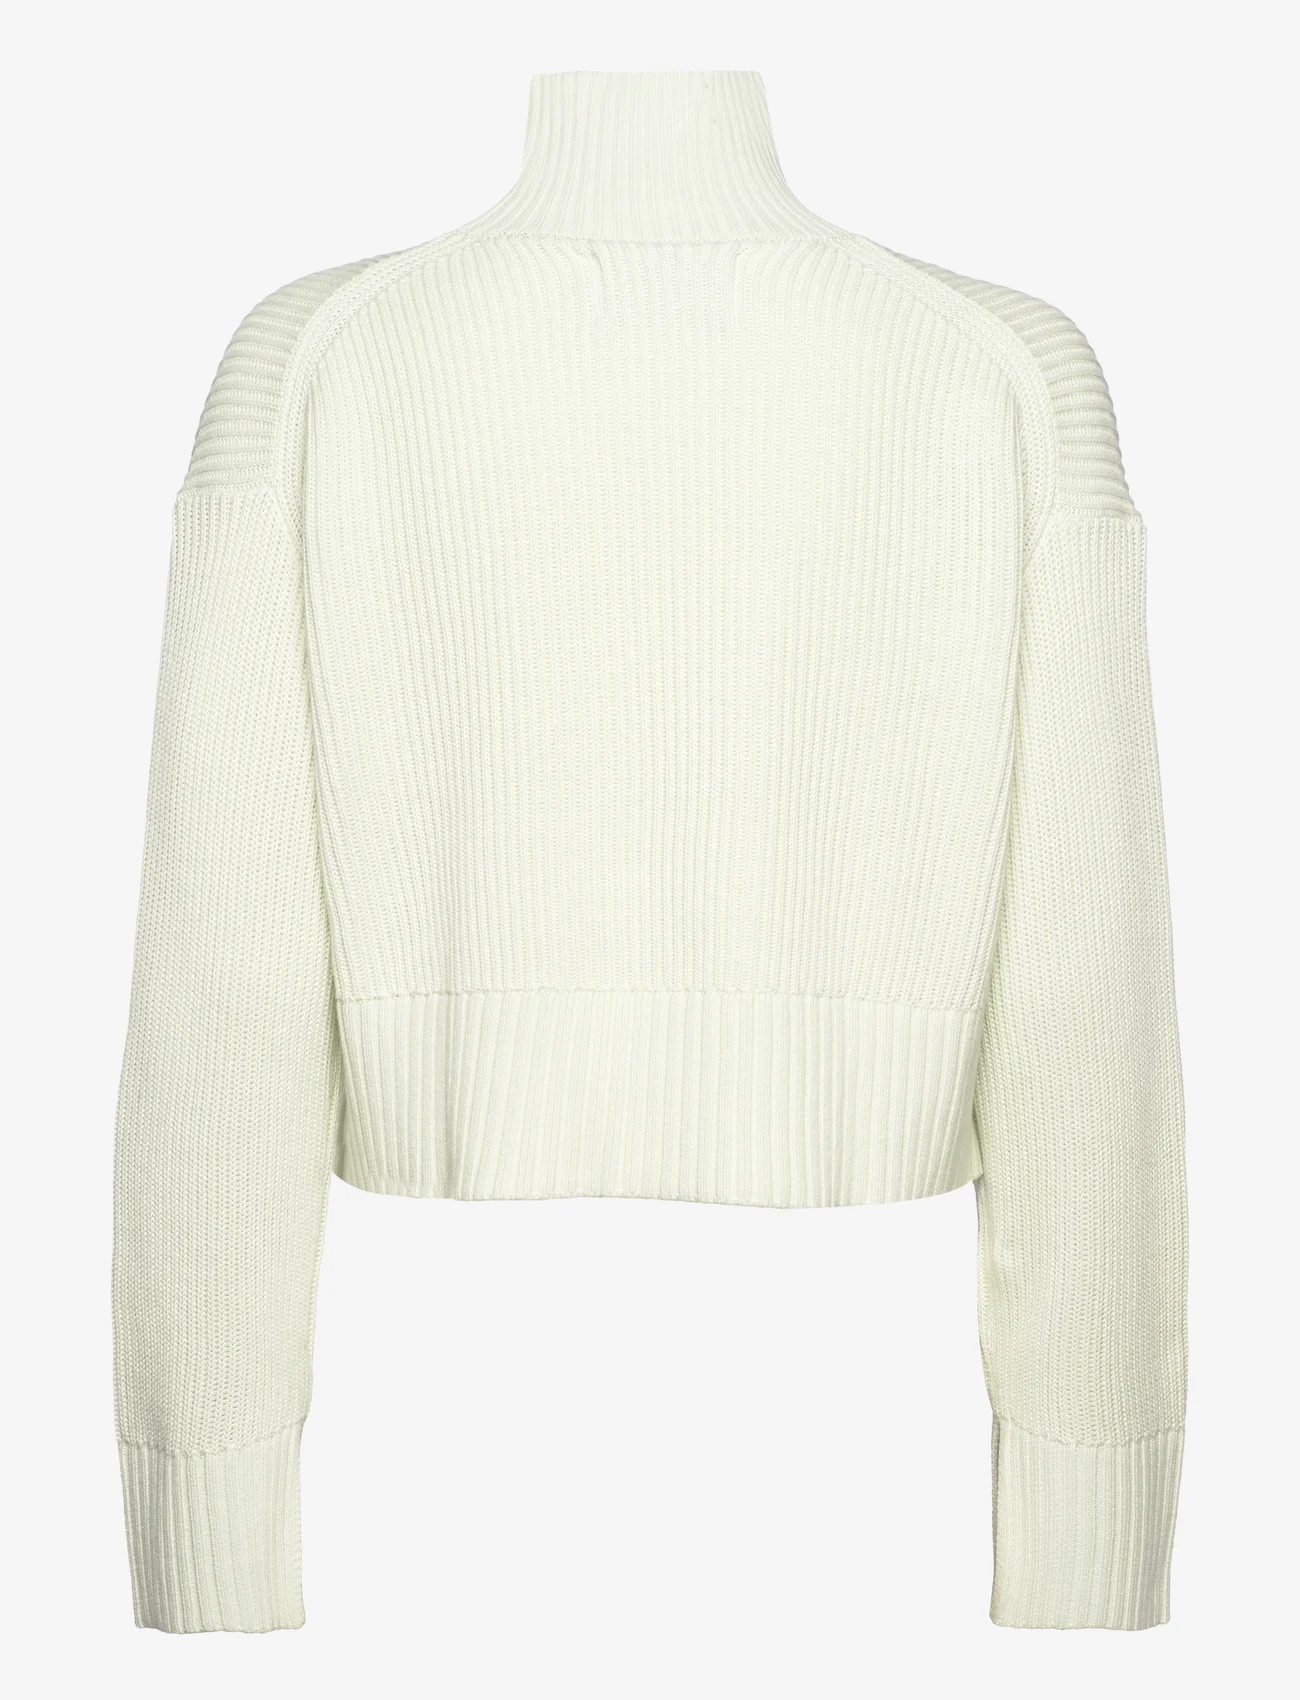 Calvin Klein Jeans - LABEL CHUNKY SWEATER - rollkragenpullover - canary green - 1